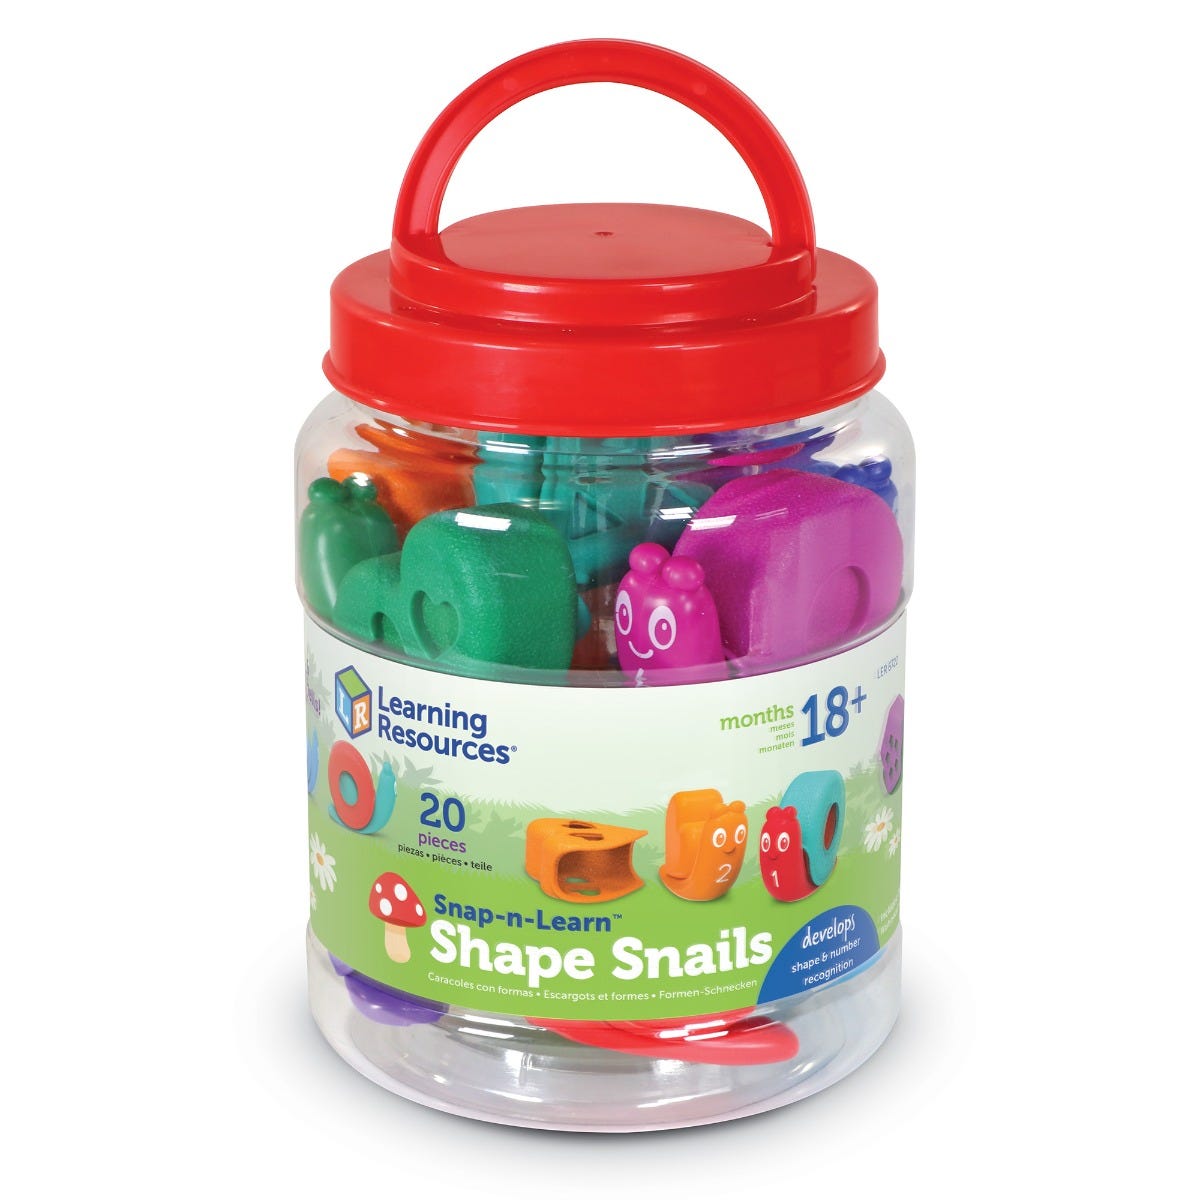 Snap-N-Learn Shape Snails, These friendly Snap-n-Learn snails carry a load of learning on their backs! This colourful 20-piece set includes 10 numbered snails, each with a removable shape shell. There are three ways to learn with these friendly snails: count 1-10; match the shape shells; and learn about colours! As children remove and reposition the tactile shells, they also build hand strength and fine motor skills. When the learning fun is done, the snails store in the convenient storage tub with carry ha